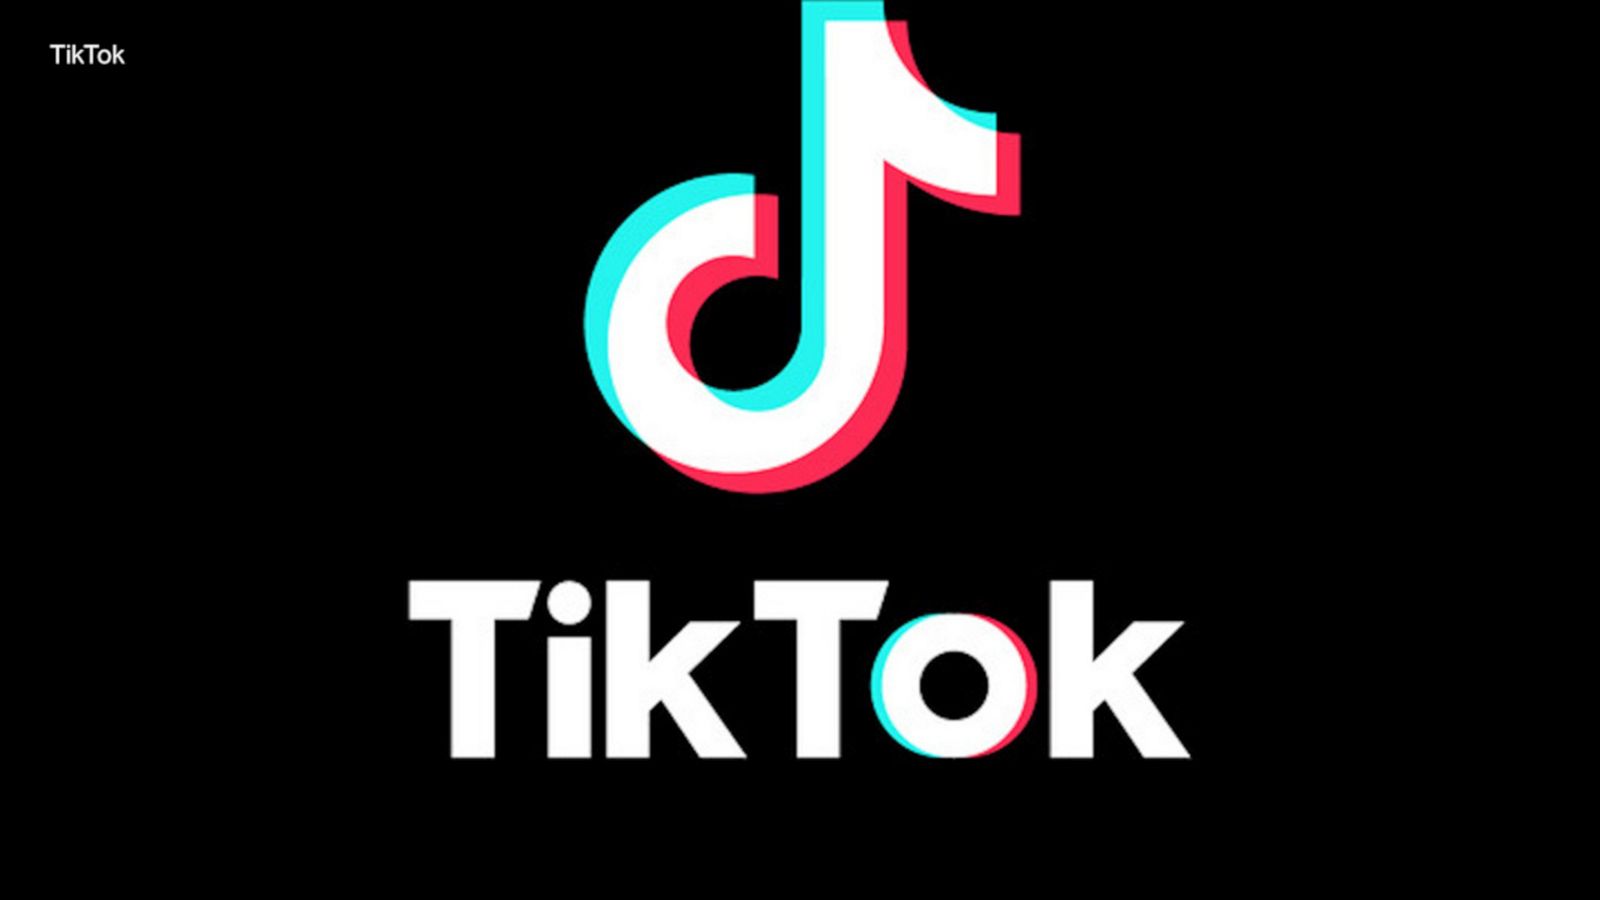 TikTok is internets most-visited site in 2021